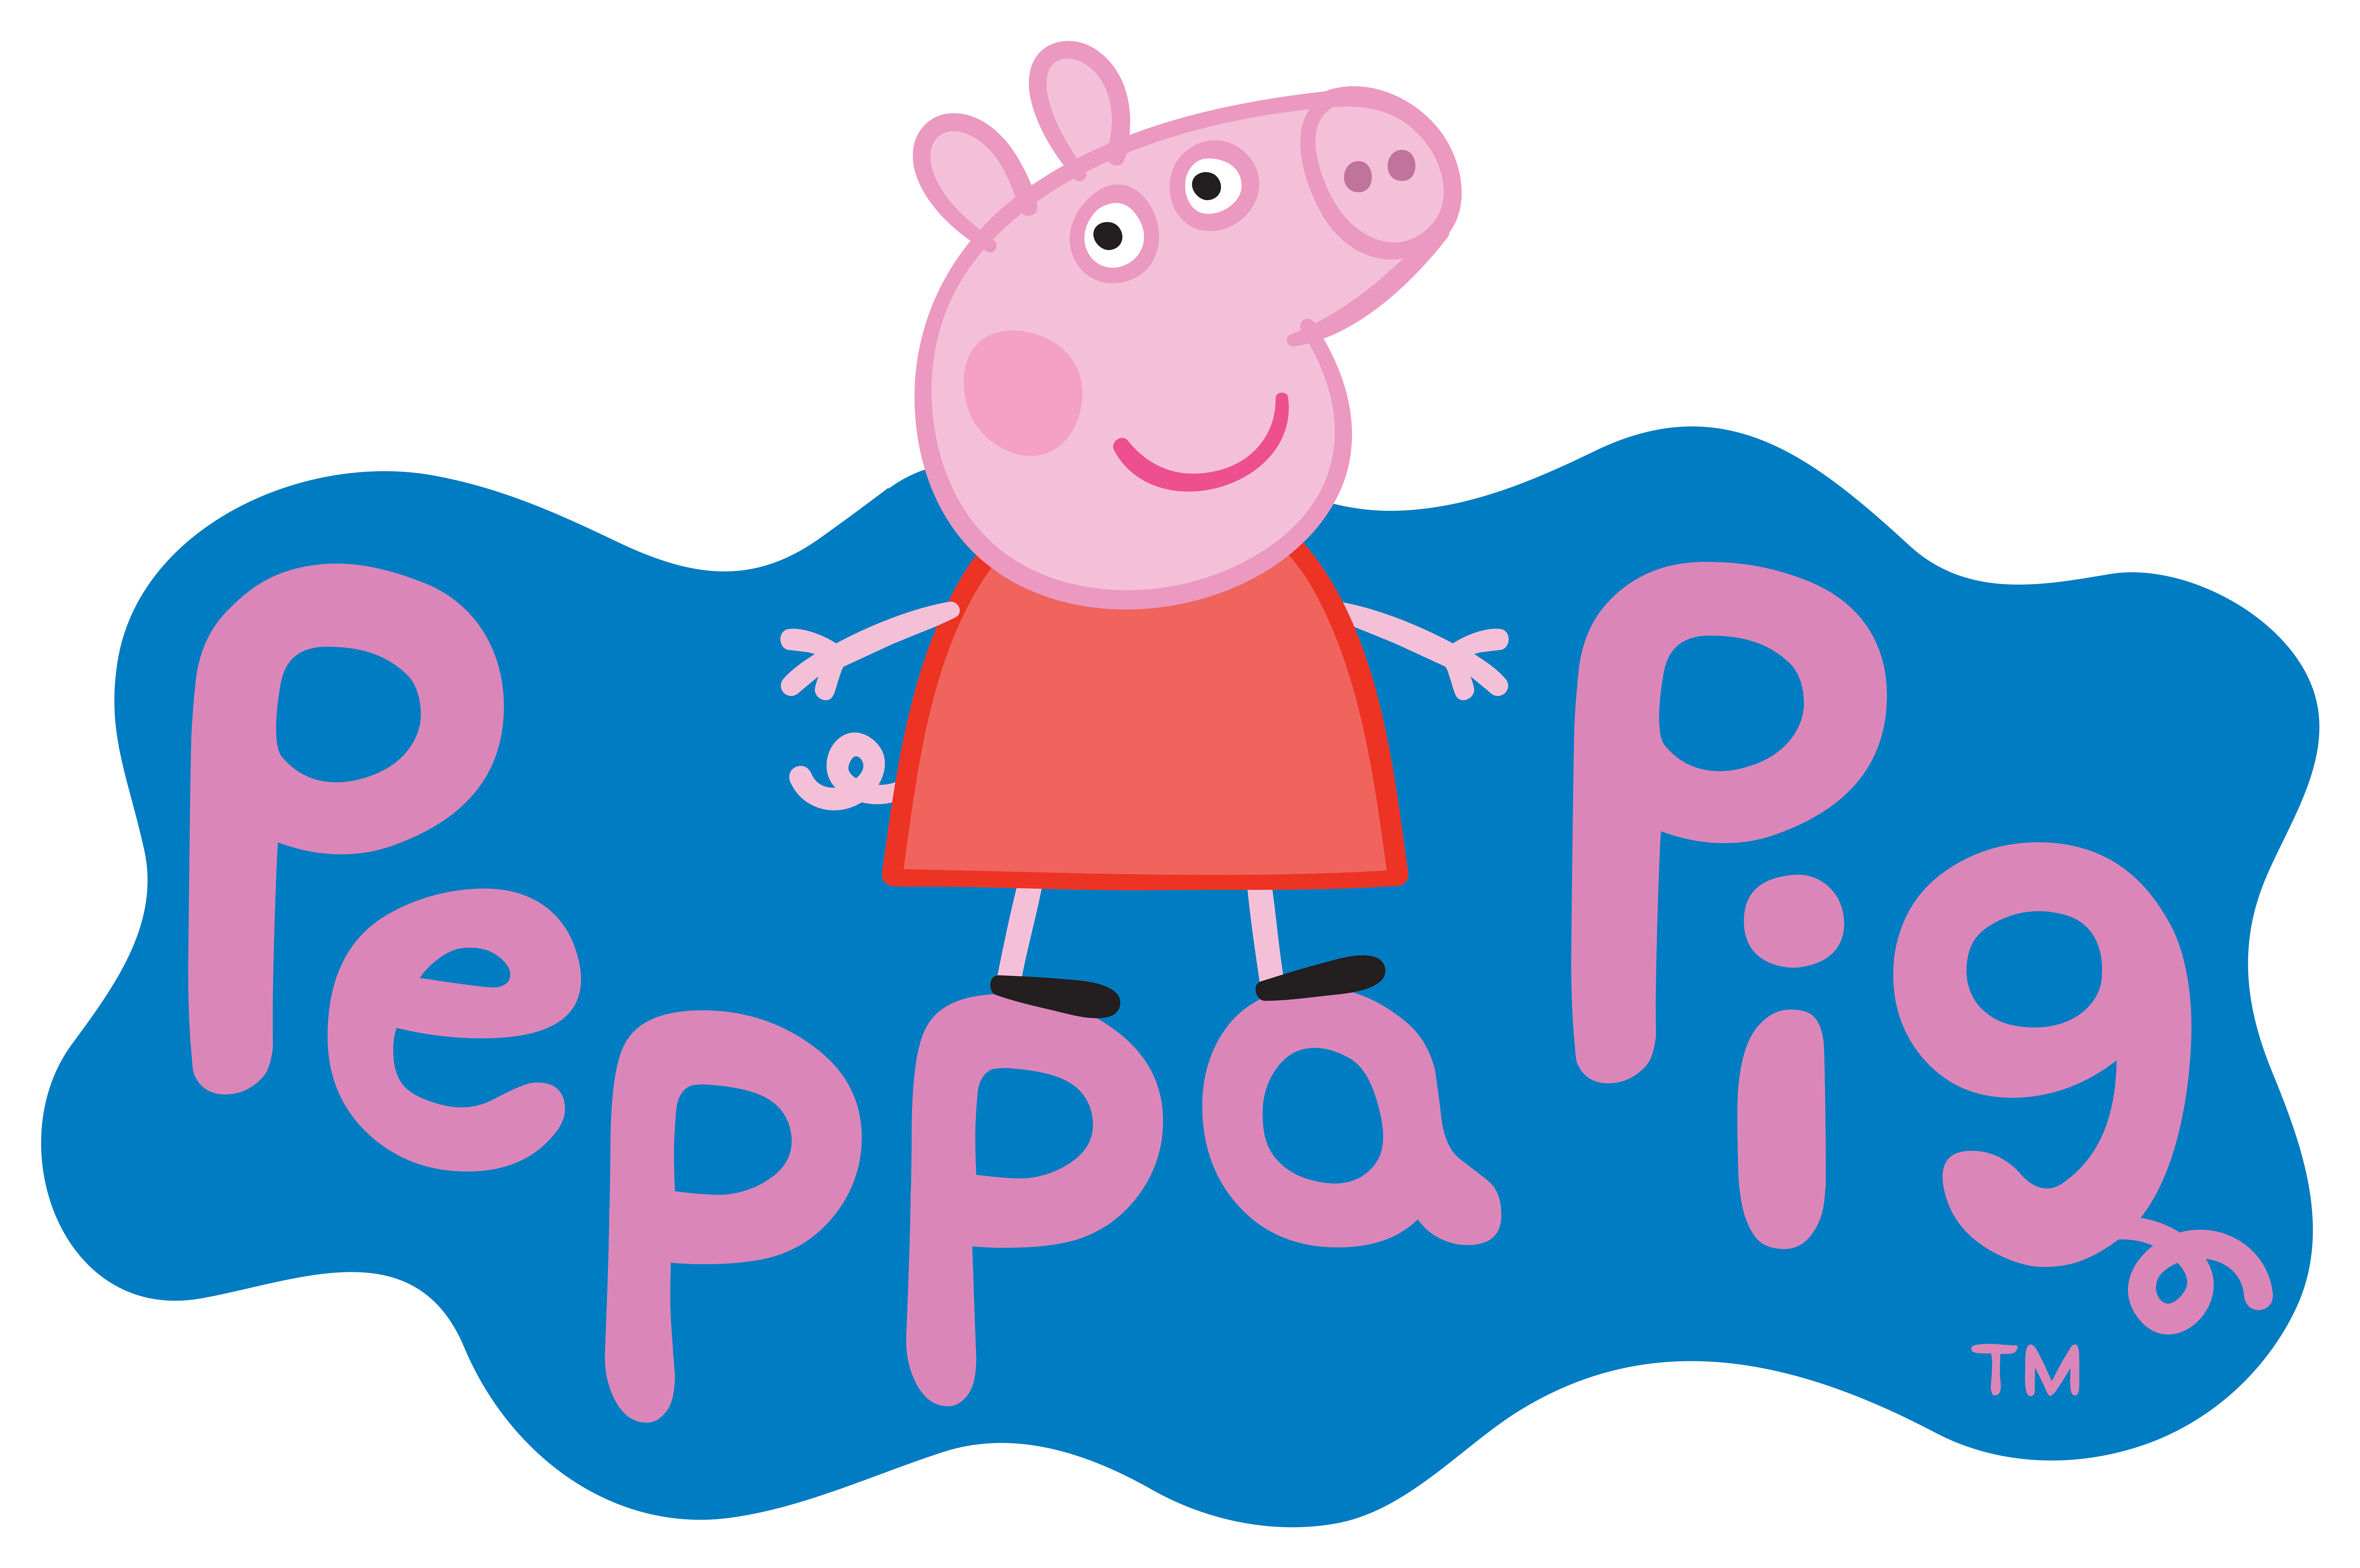 Peppa Pig PNG Image in High Definition pngteam.com